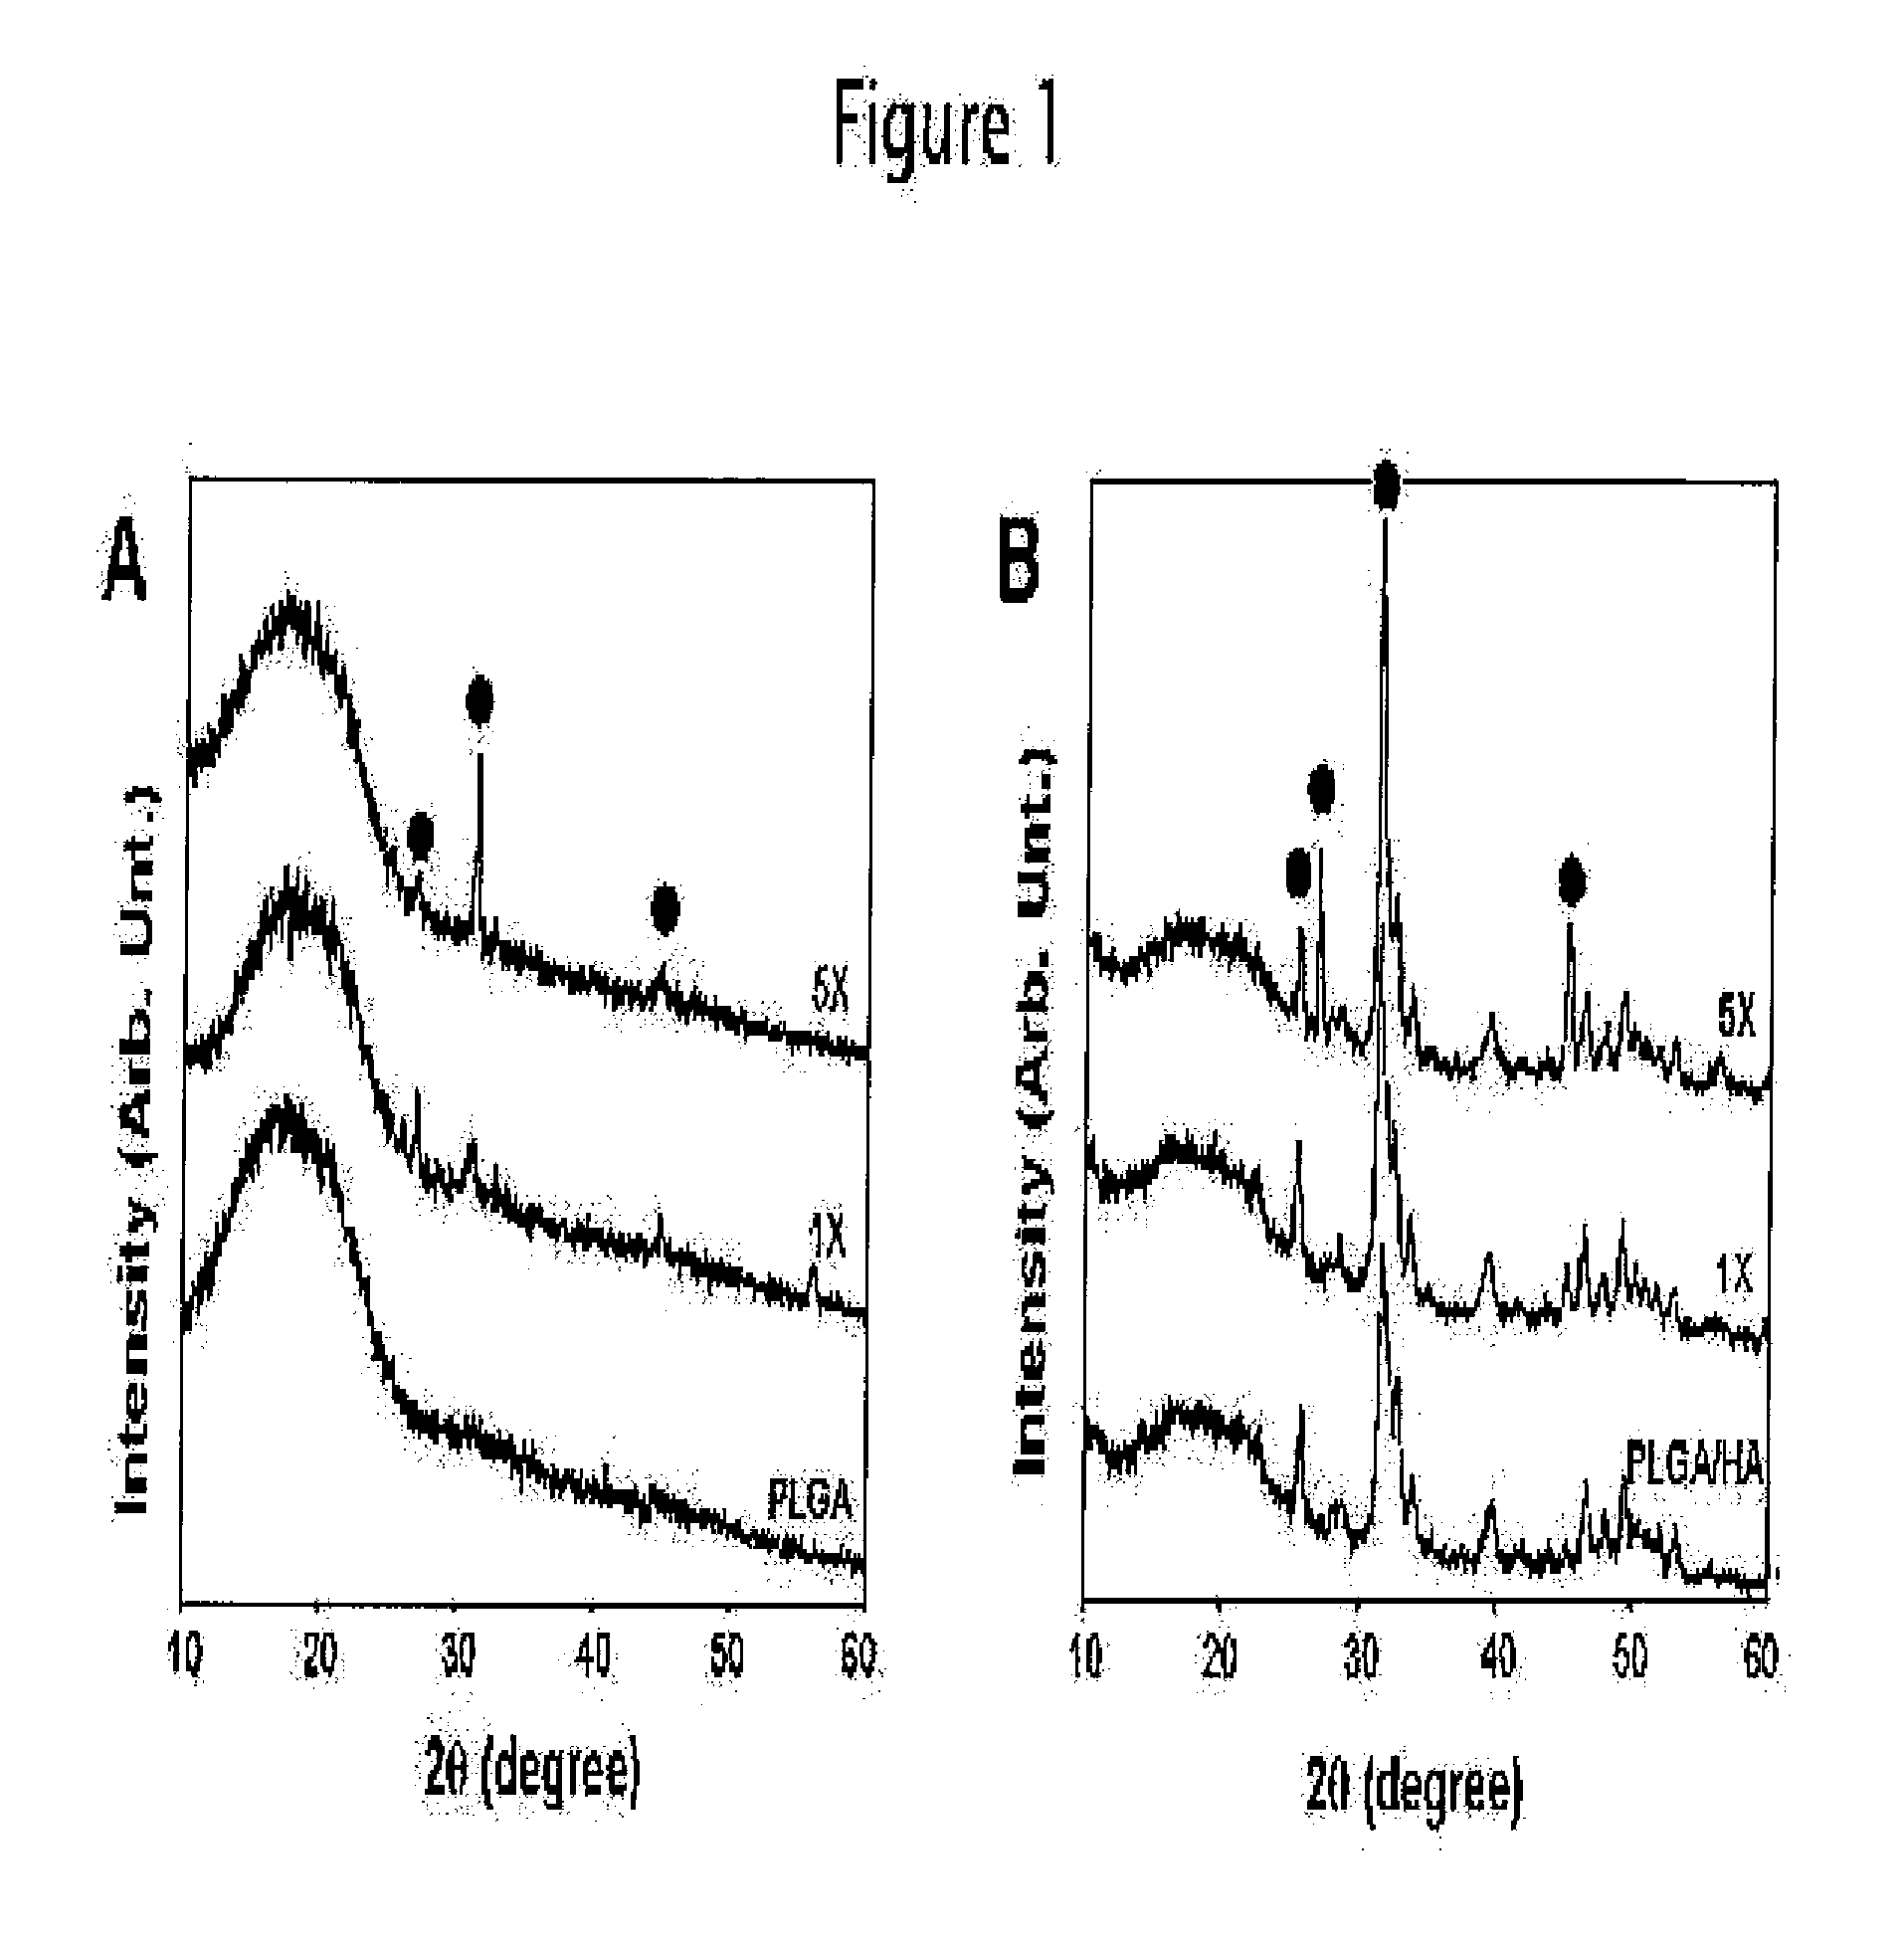 PLGA/Hydroxyapatite Composite Biomaterial and Method of Making the Same